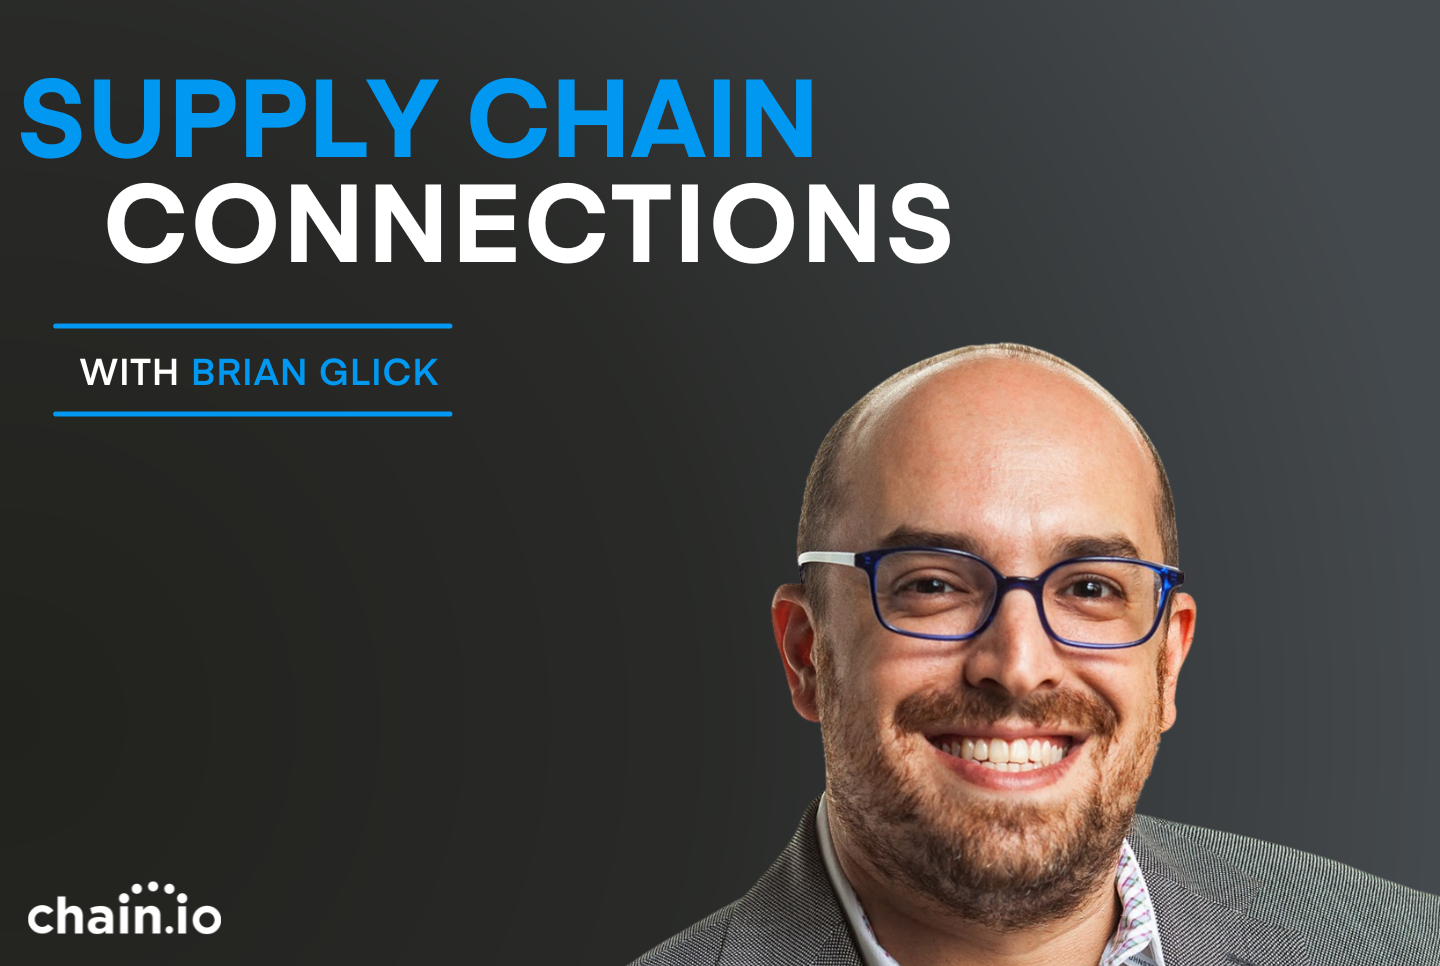 Supply Chain Connections with Brian Glick is a podcast by Chain.io about the latest supply chain technology and the people who make it happen. 